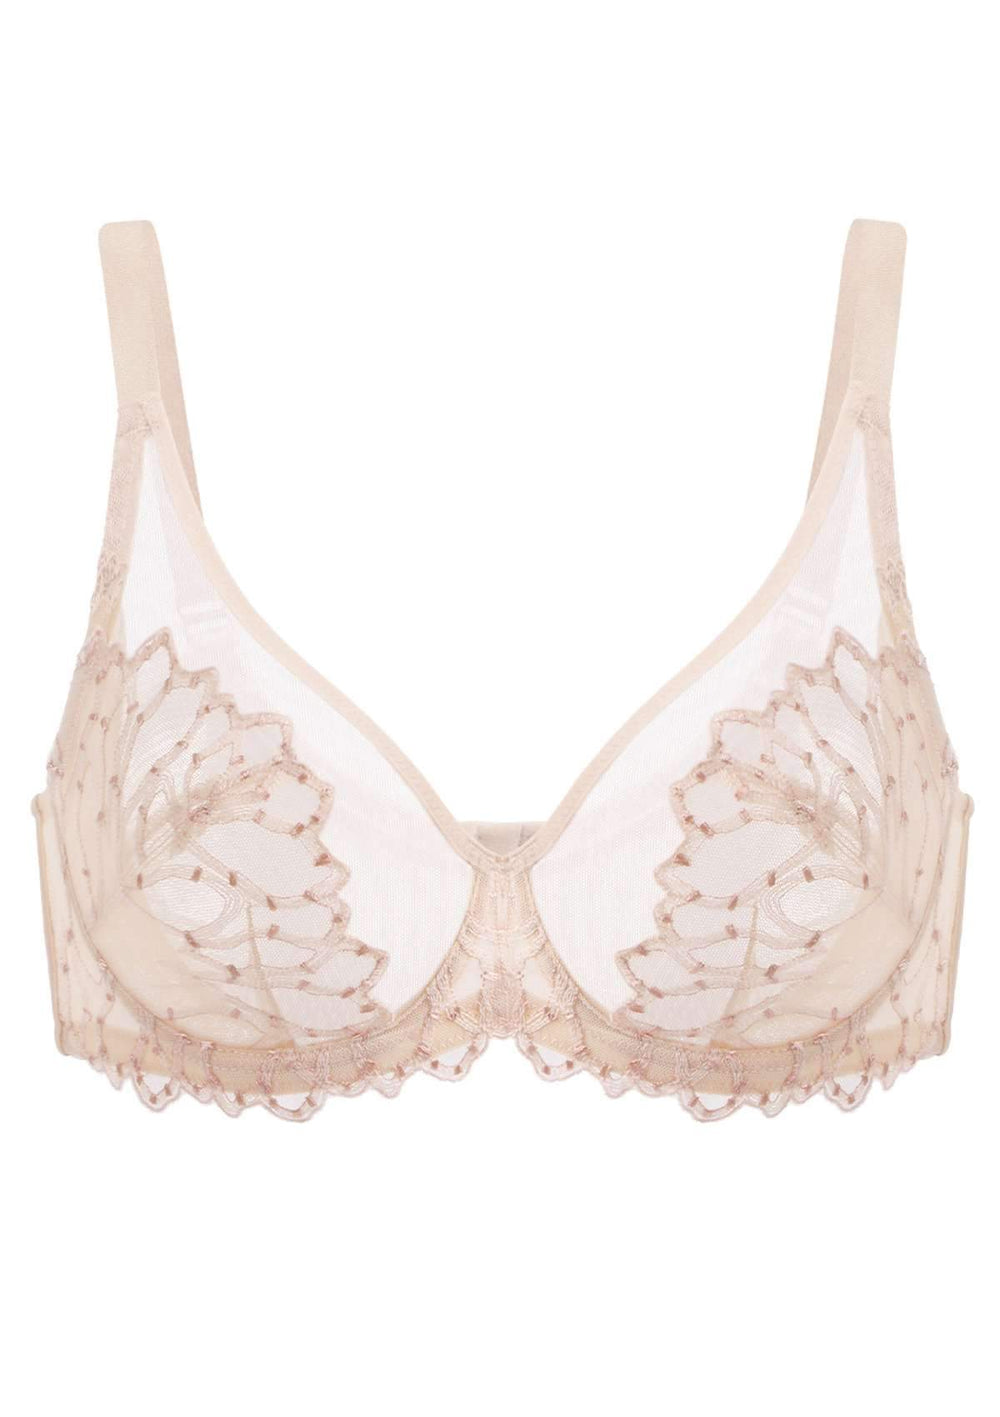 Unlined Bras - Buy a Quality-Made Women's Unlined Bra Page 12